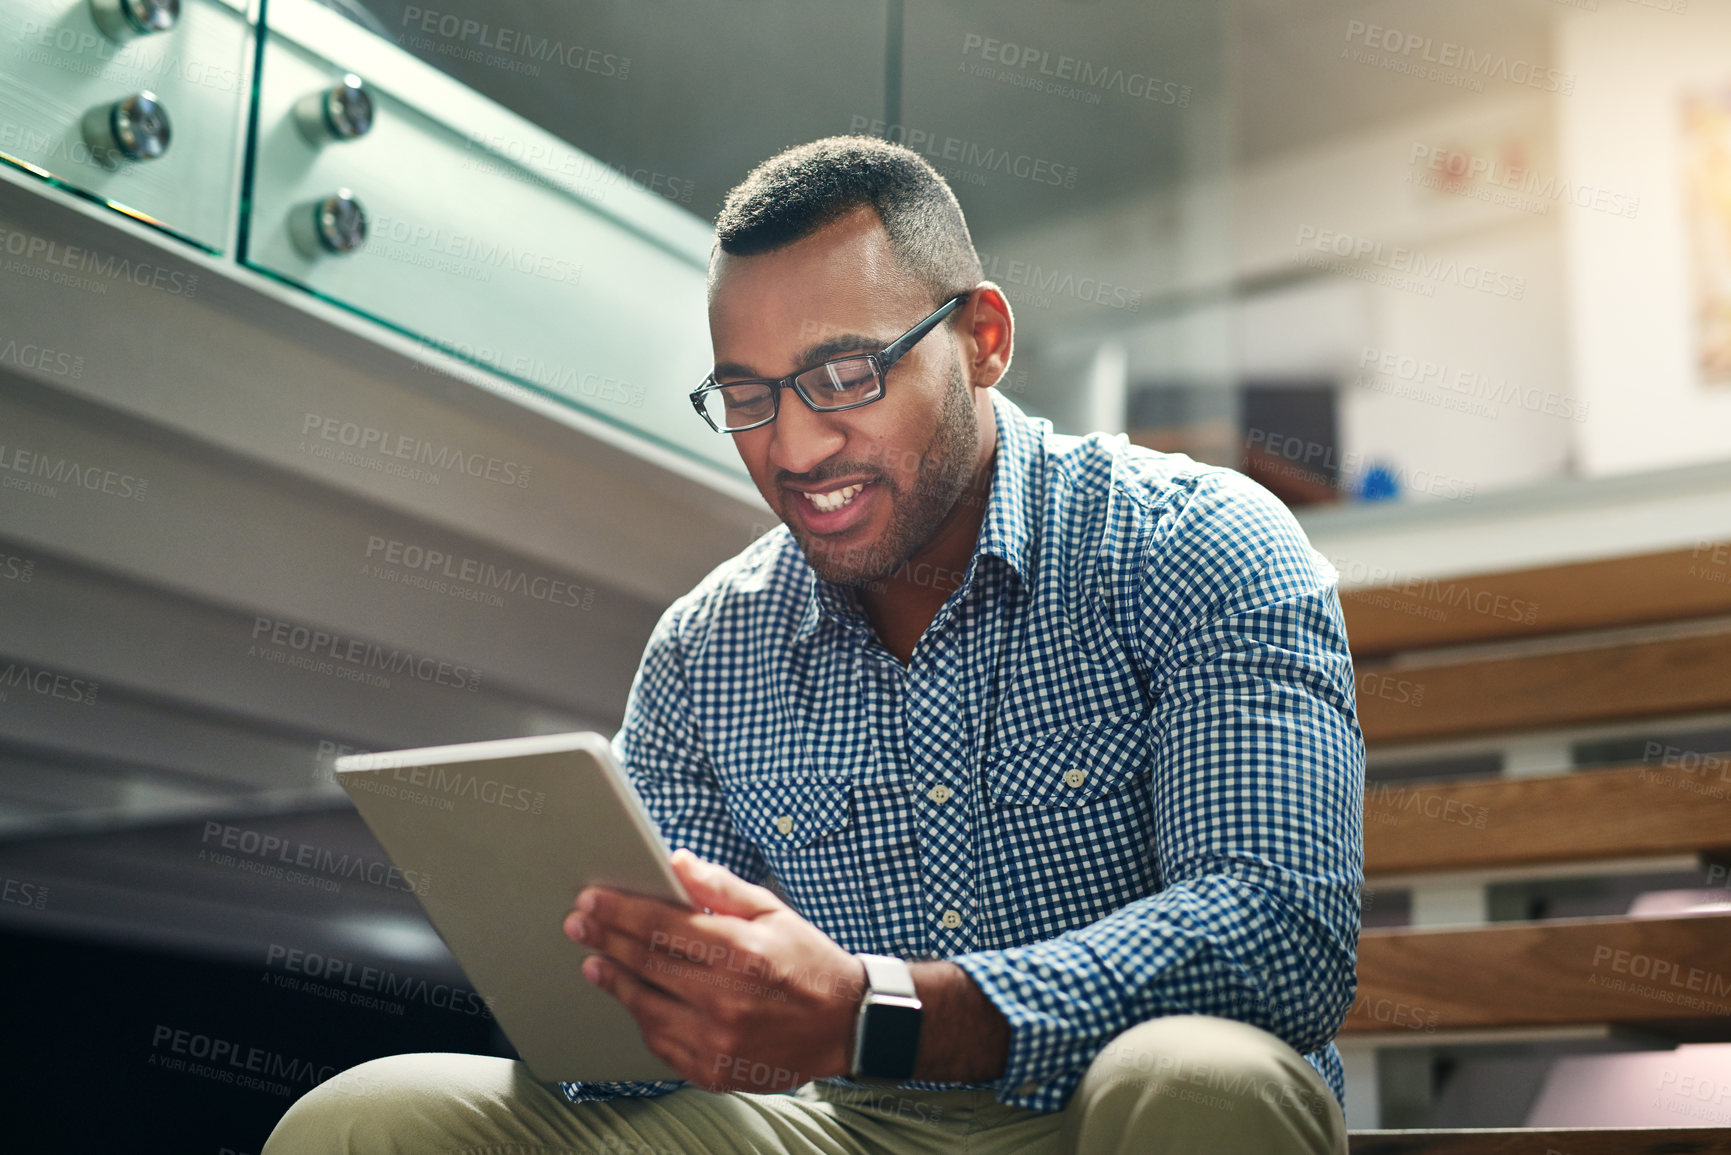 Buy stock photo Cropped shot of a handsome young businessman using his tablet in the office